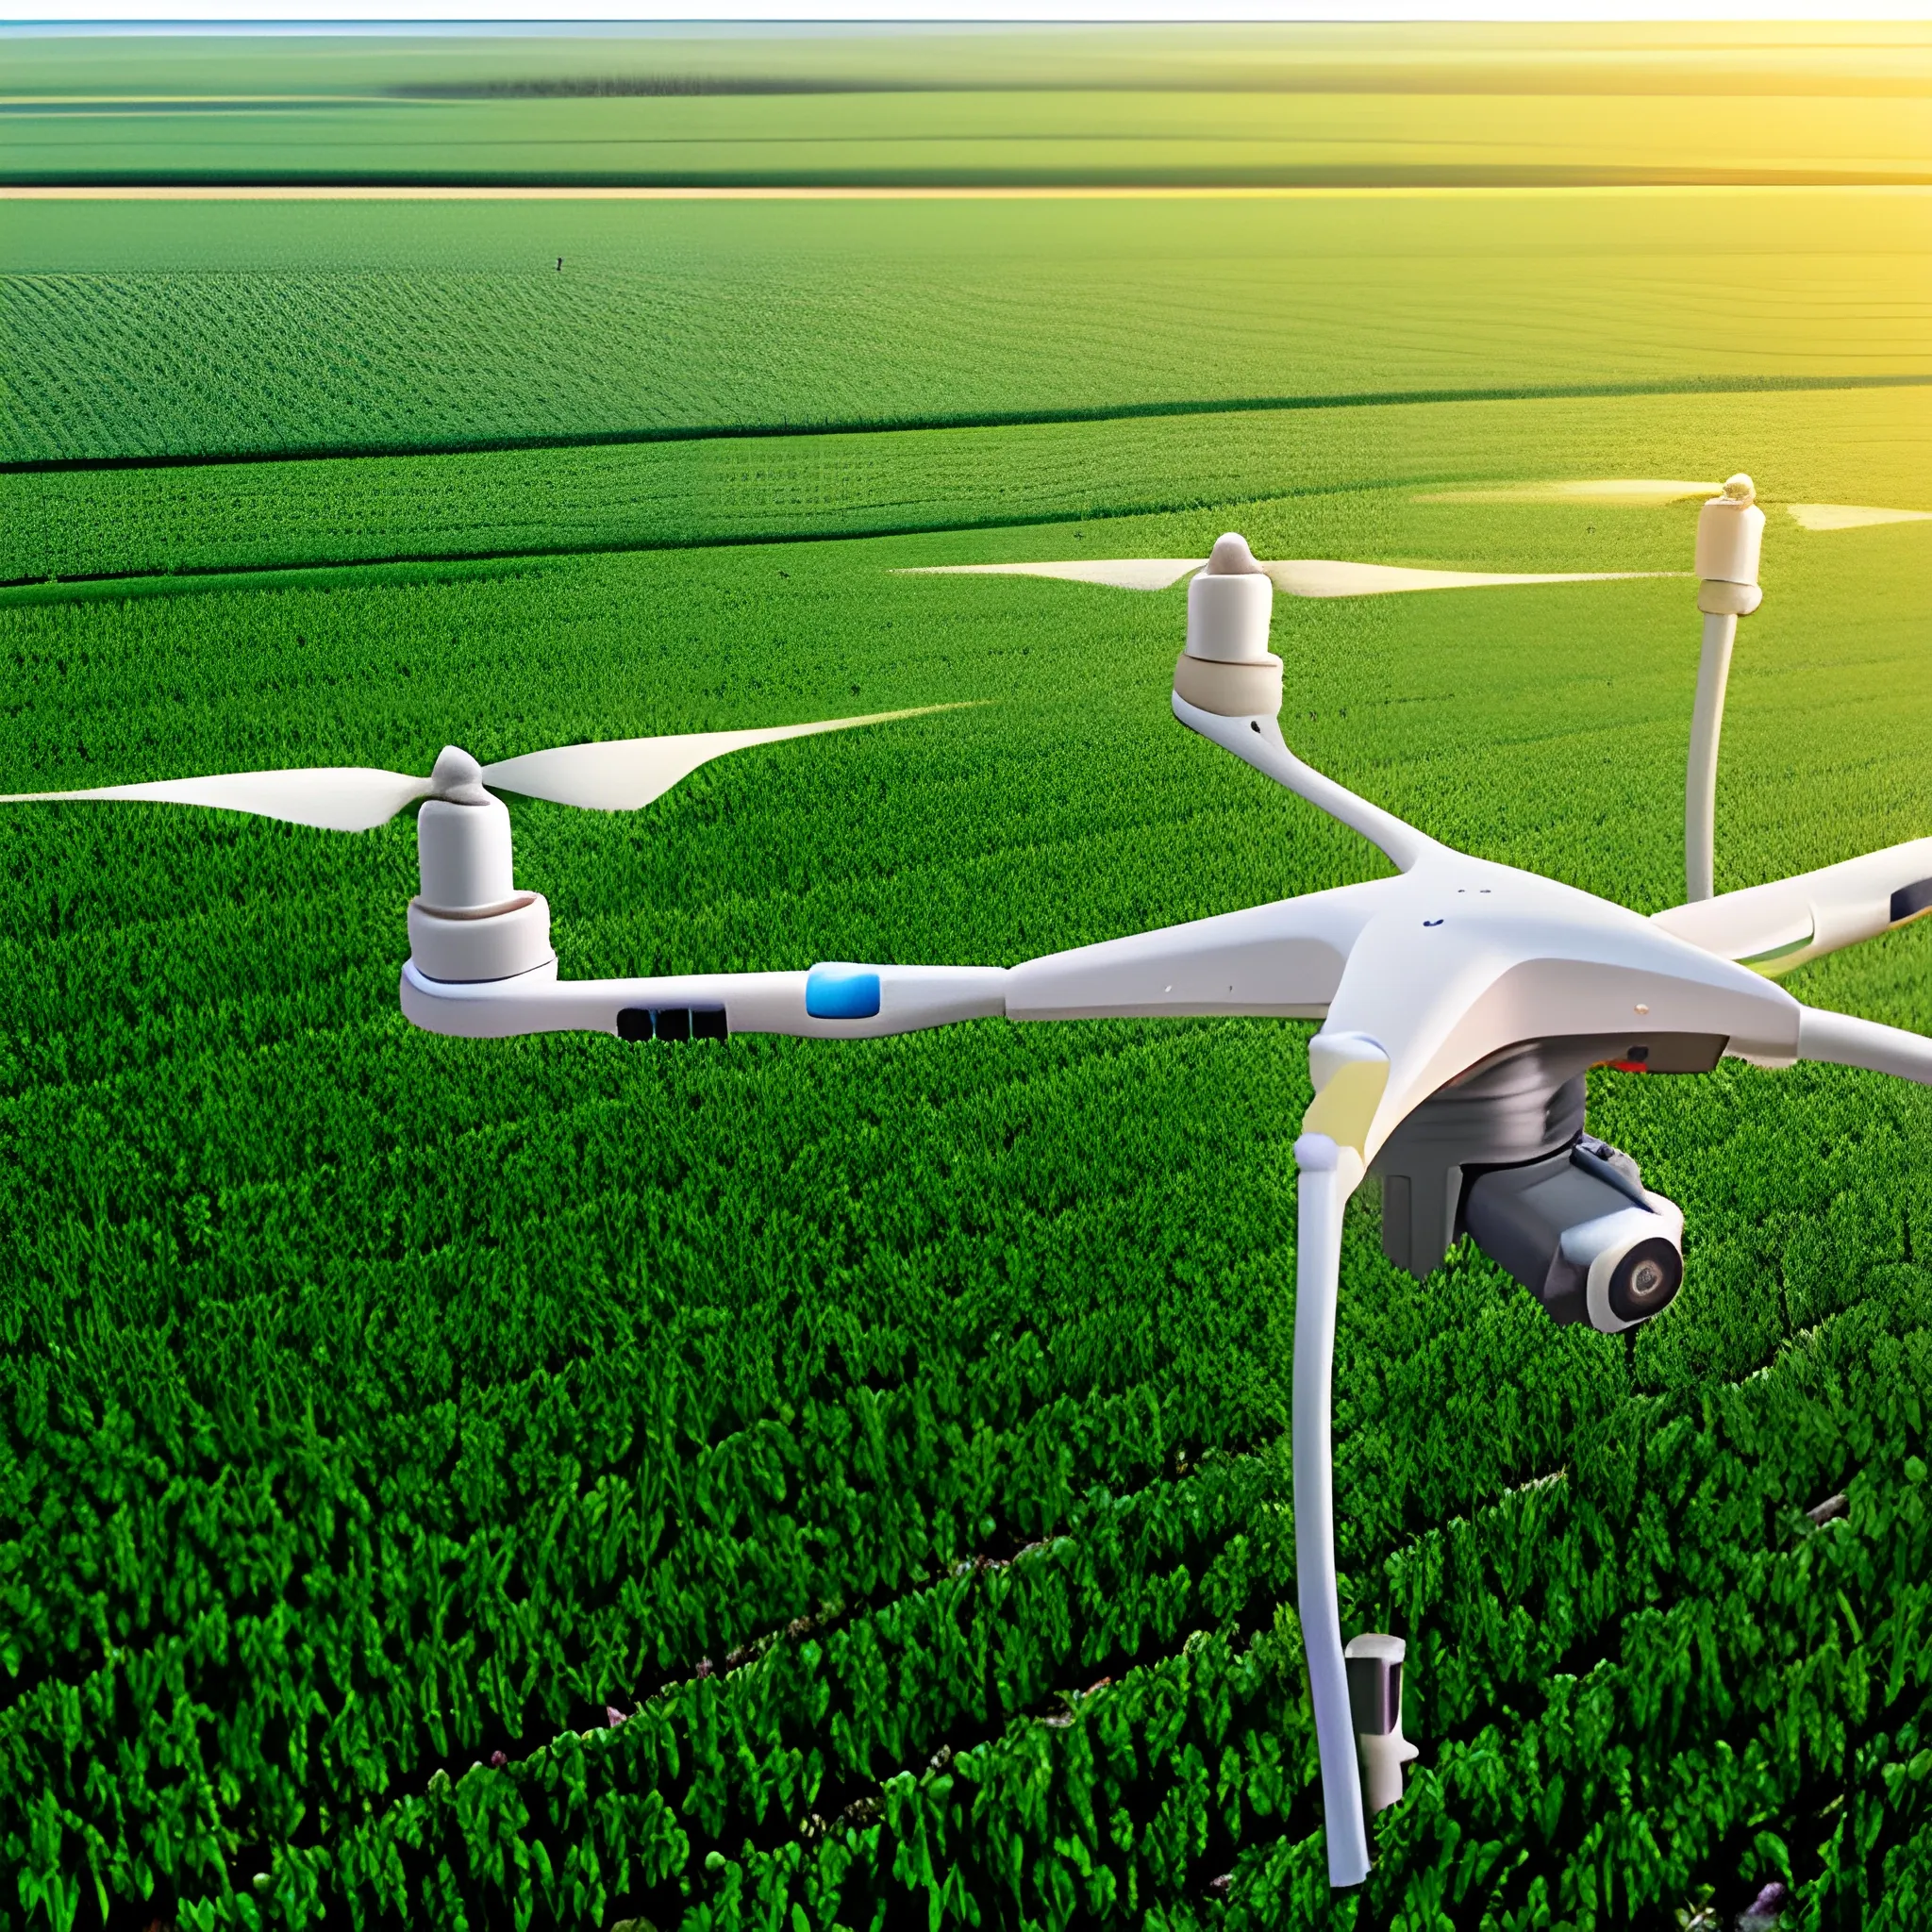 the inclusion of ICTs in the development of agricultural sciences, including a drone, a smart irrigation system, 3D